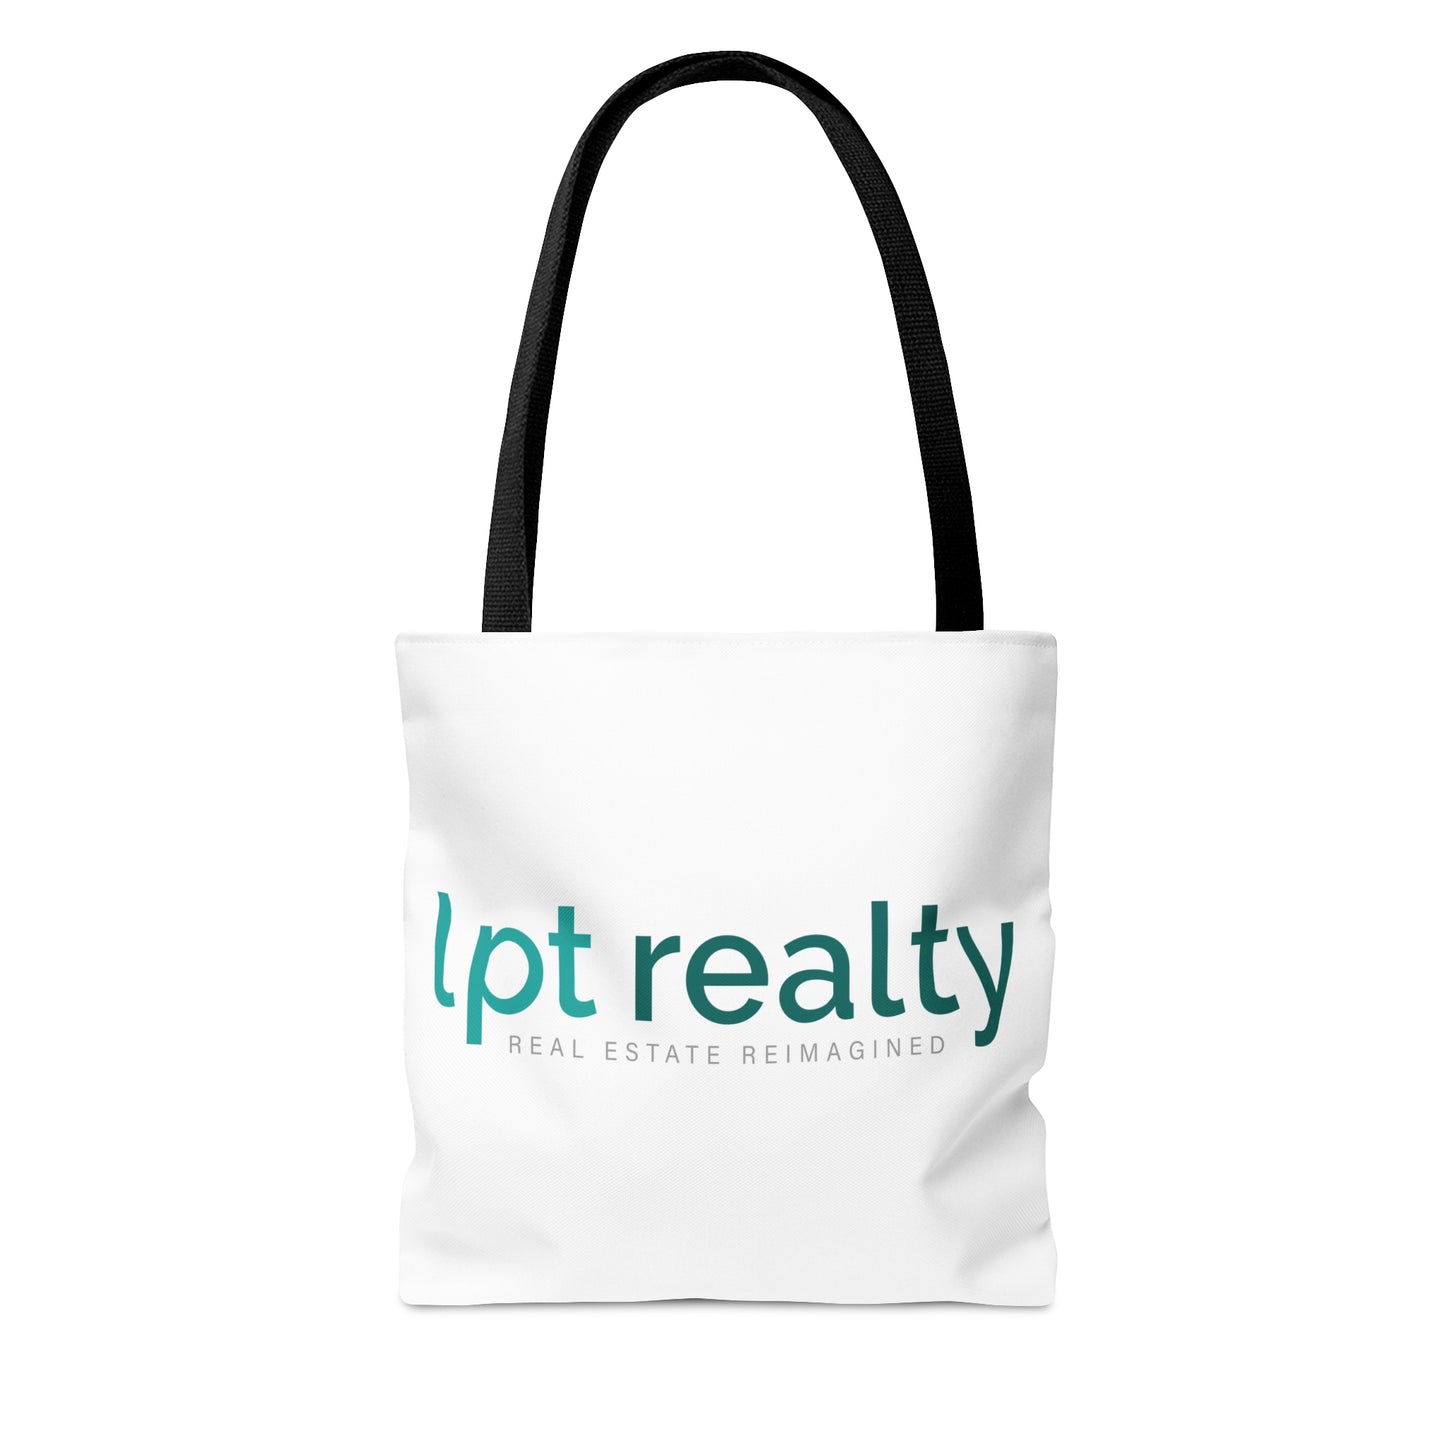 LPT Realty Logo's on Both Sides in Teal - Canvas Tote 3 Sizes